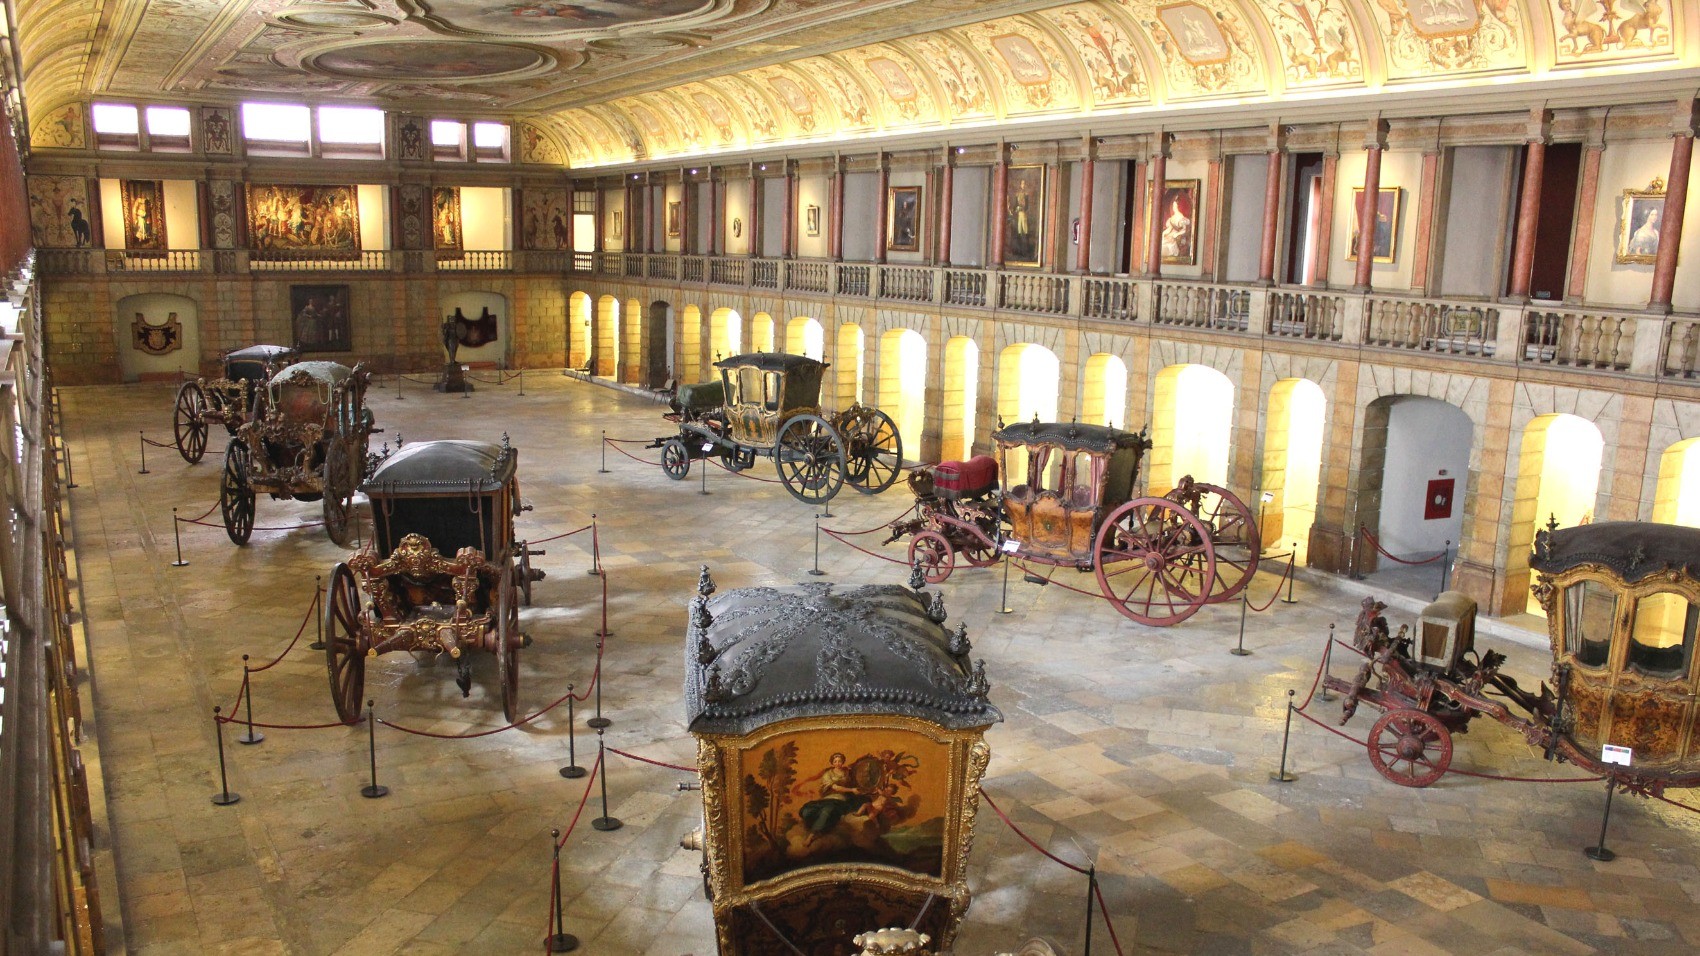 Lisbon-for-Lovers-coach-museum-CREDIT-Pedro-Beltrão-DGPC-Museu-dos-Coches